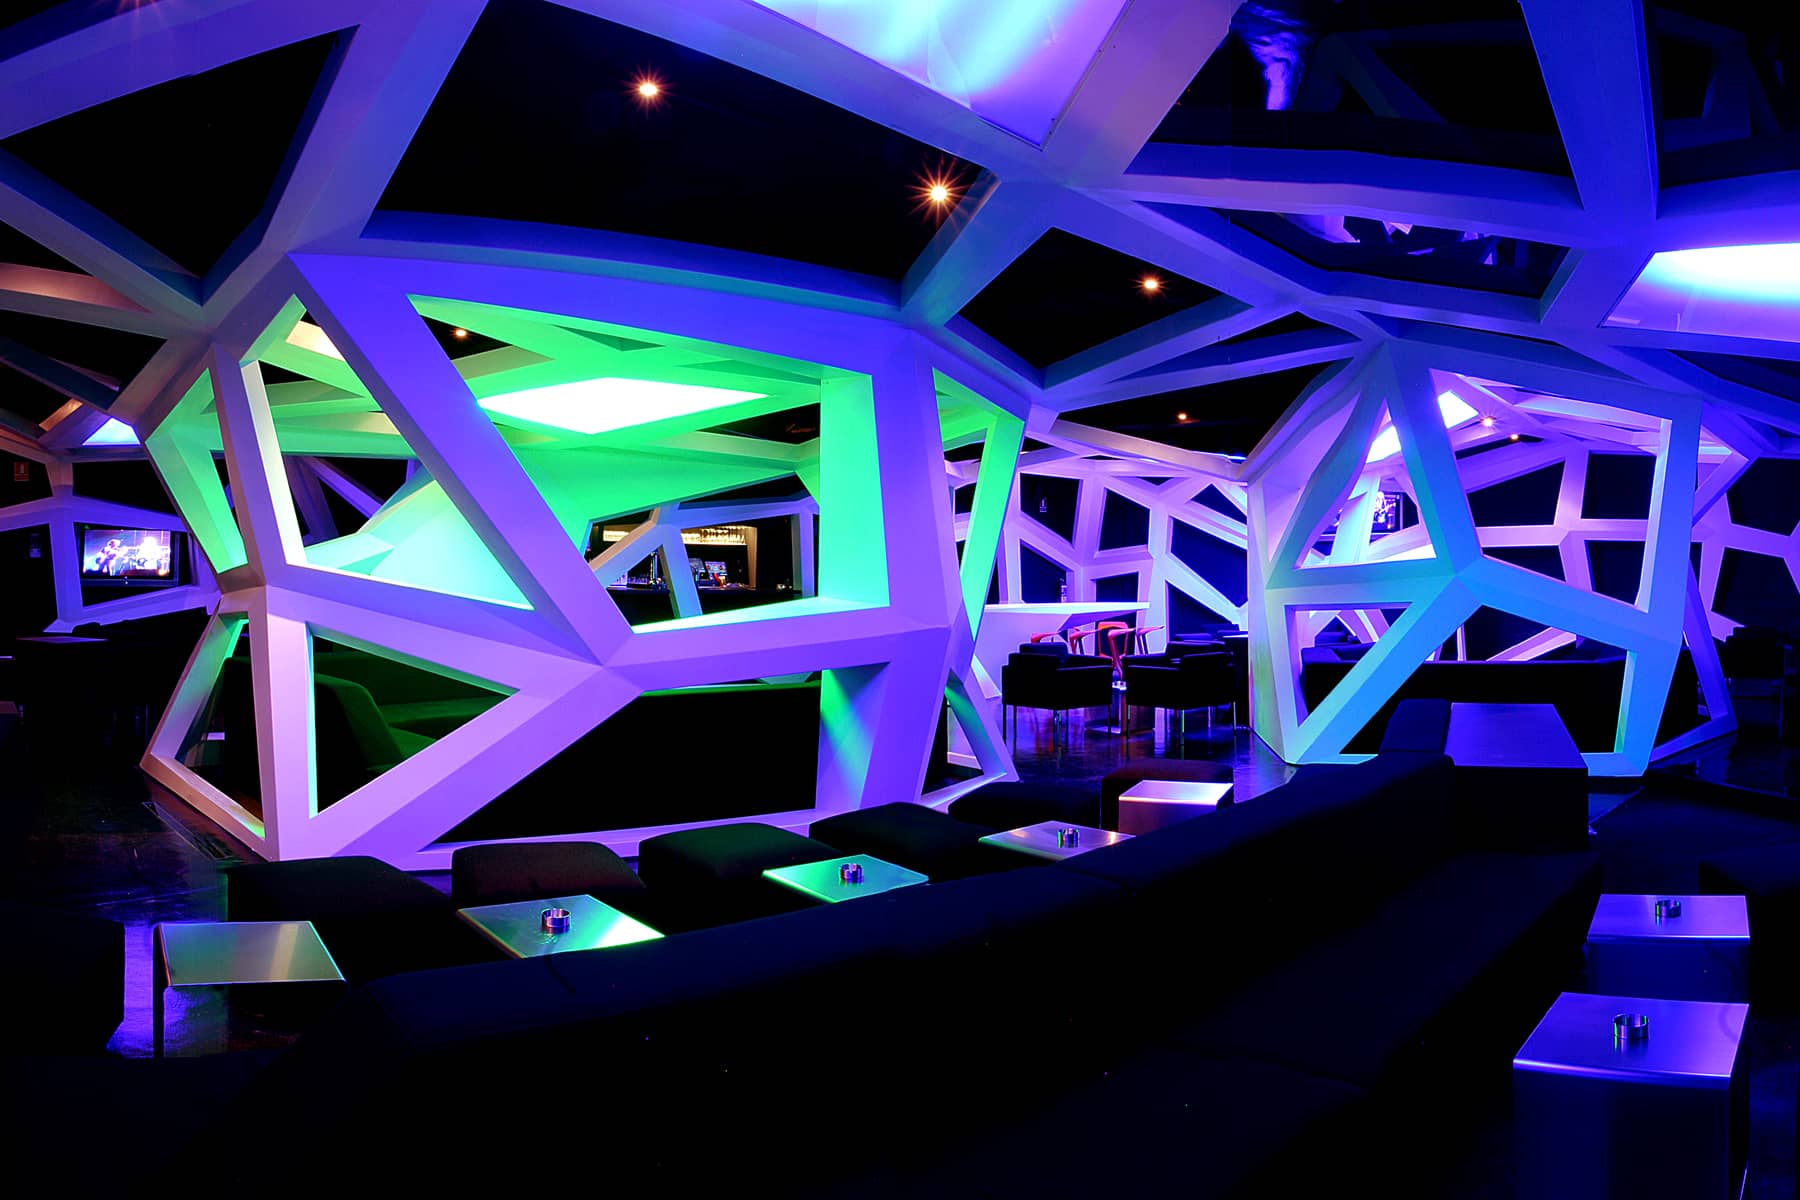 ON-A’s first project was located in a summer resort town on the Costa Brava. The Lounge & Bar was designed for an existing central location. The resources used in the design are intended to stimulate all the senses: there are visual, chromatic, and auditory effects that contribute to the user’s overall experience, surrounded by an organic and particularly complex geometry